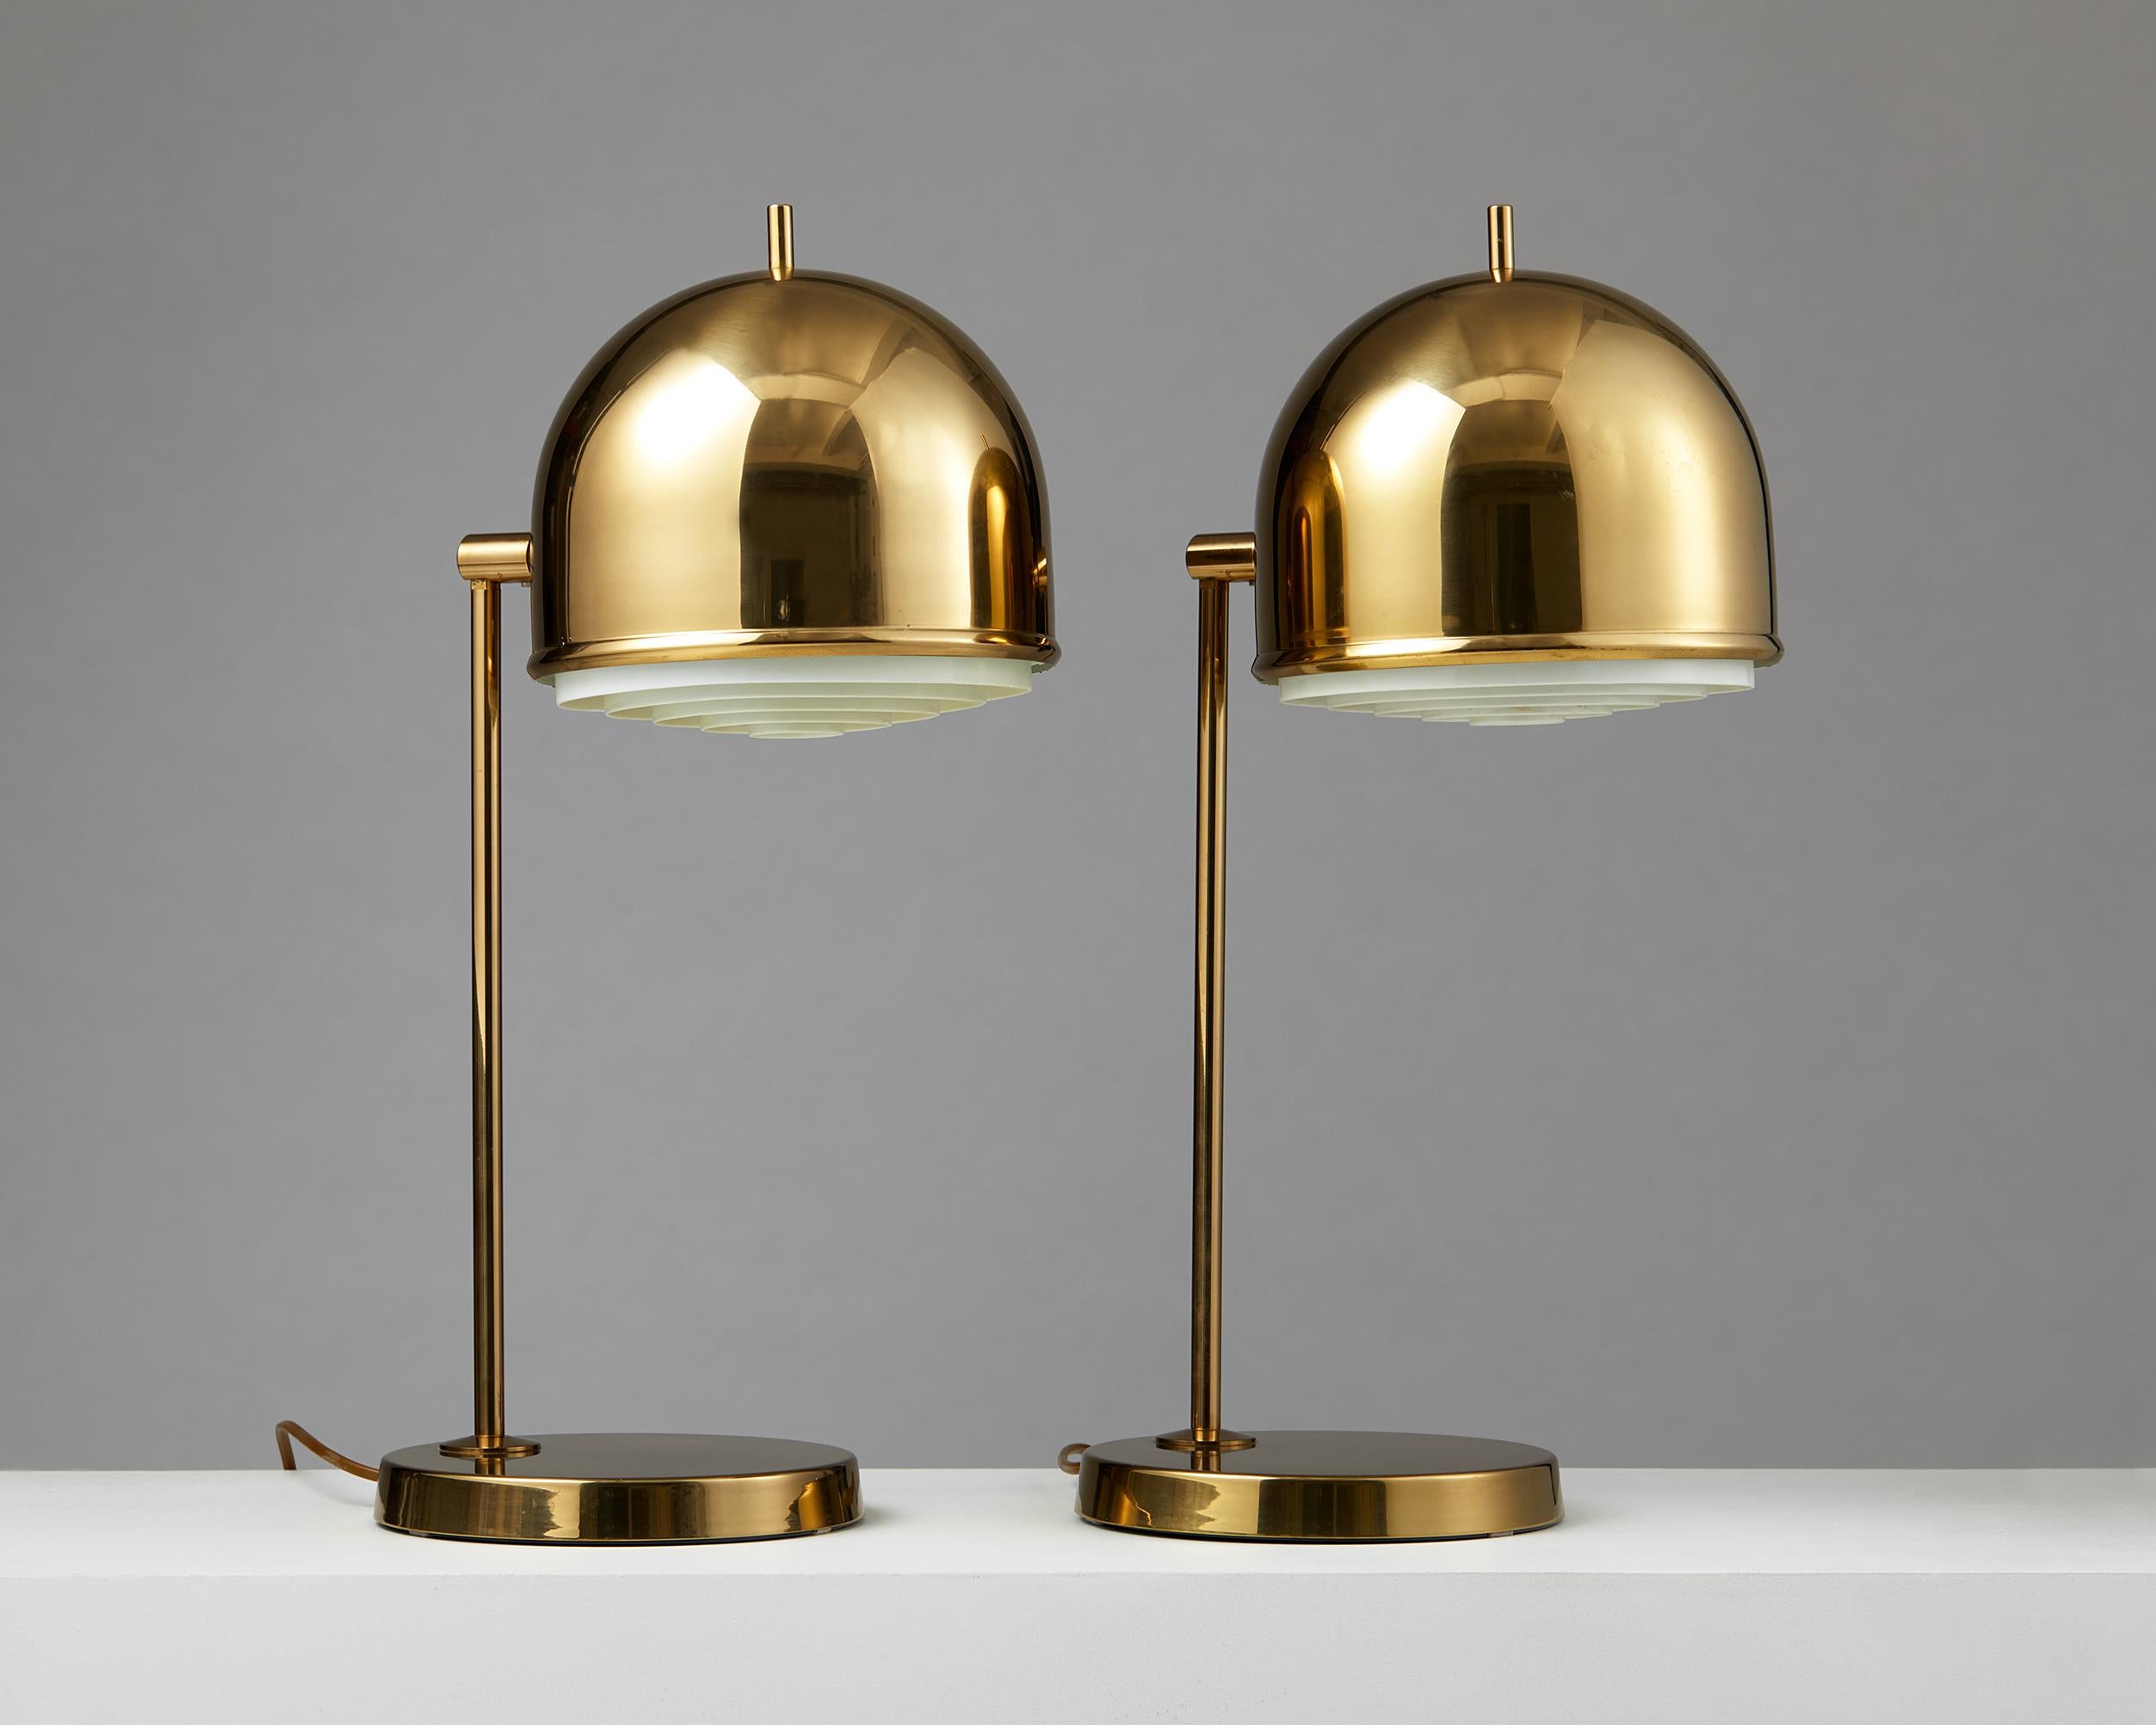 Brass.

Marked “BERGBOMS B-075”.

With its bulbous shape, this playful lamp’s intriguing proportions make it a unique Scandinavian collectable. Model B-075 is very practical — it has straightforward components and a little rod at the top of the